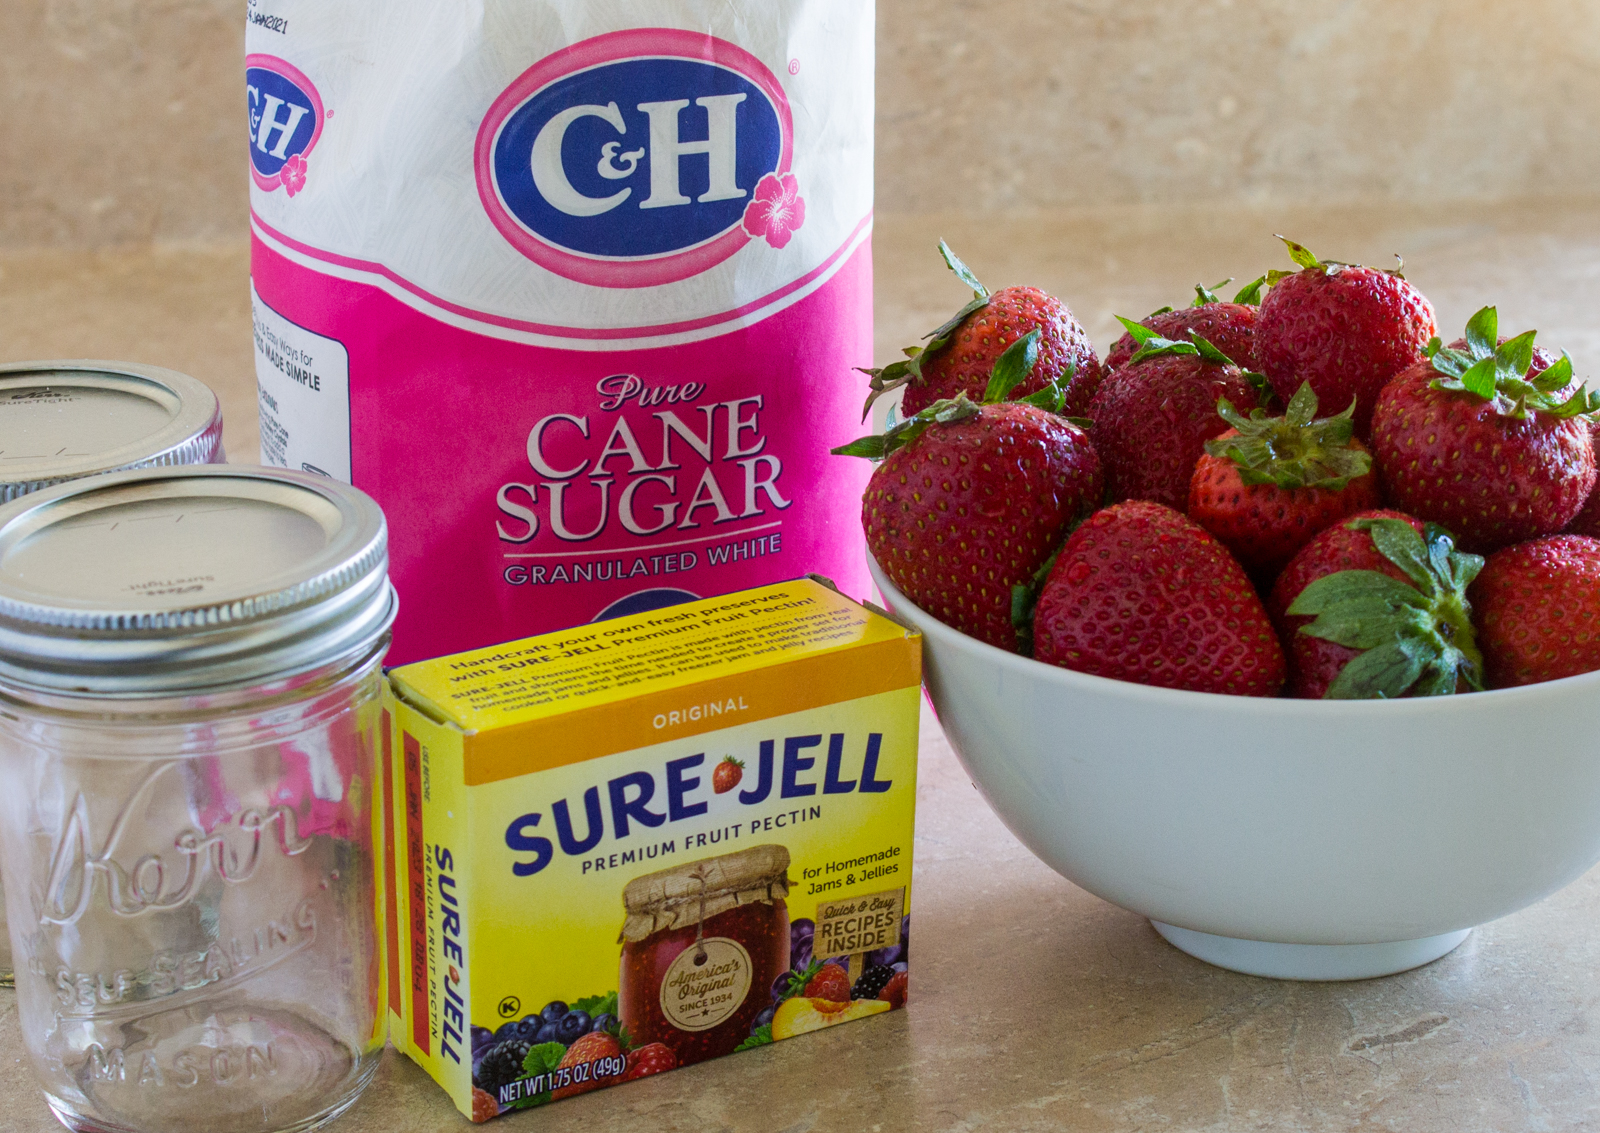 Ingredients strawberries, Sure-jell pectin, sugar and 8 ounce jars